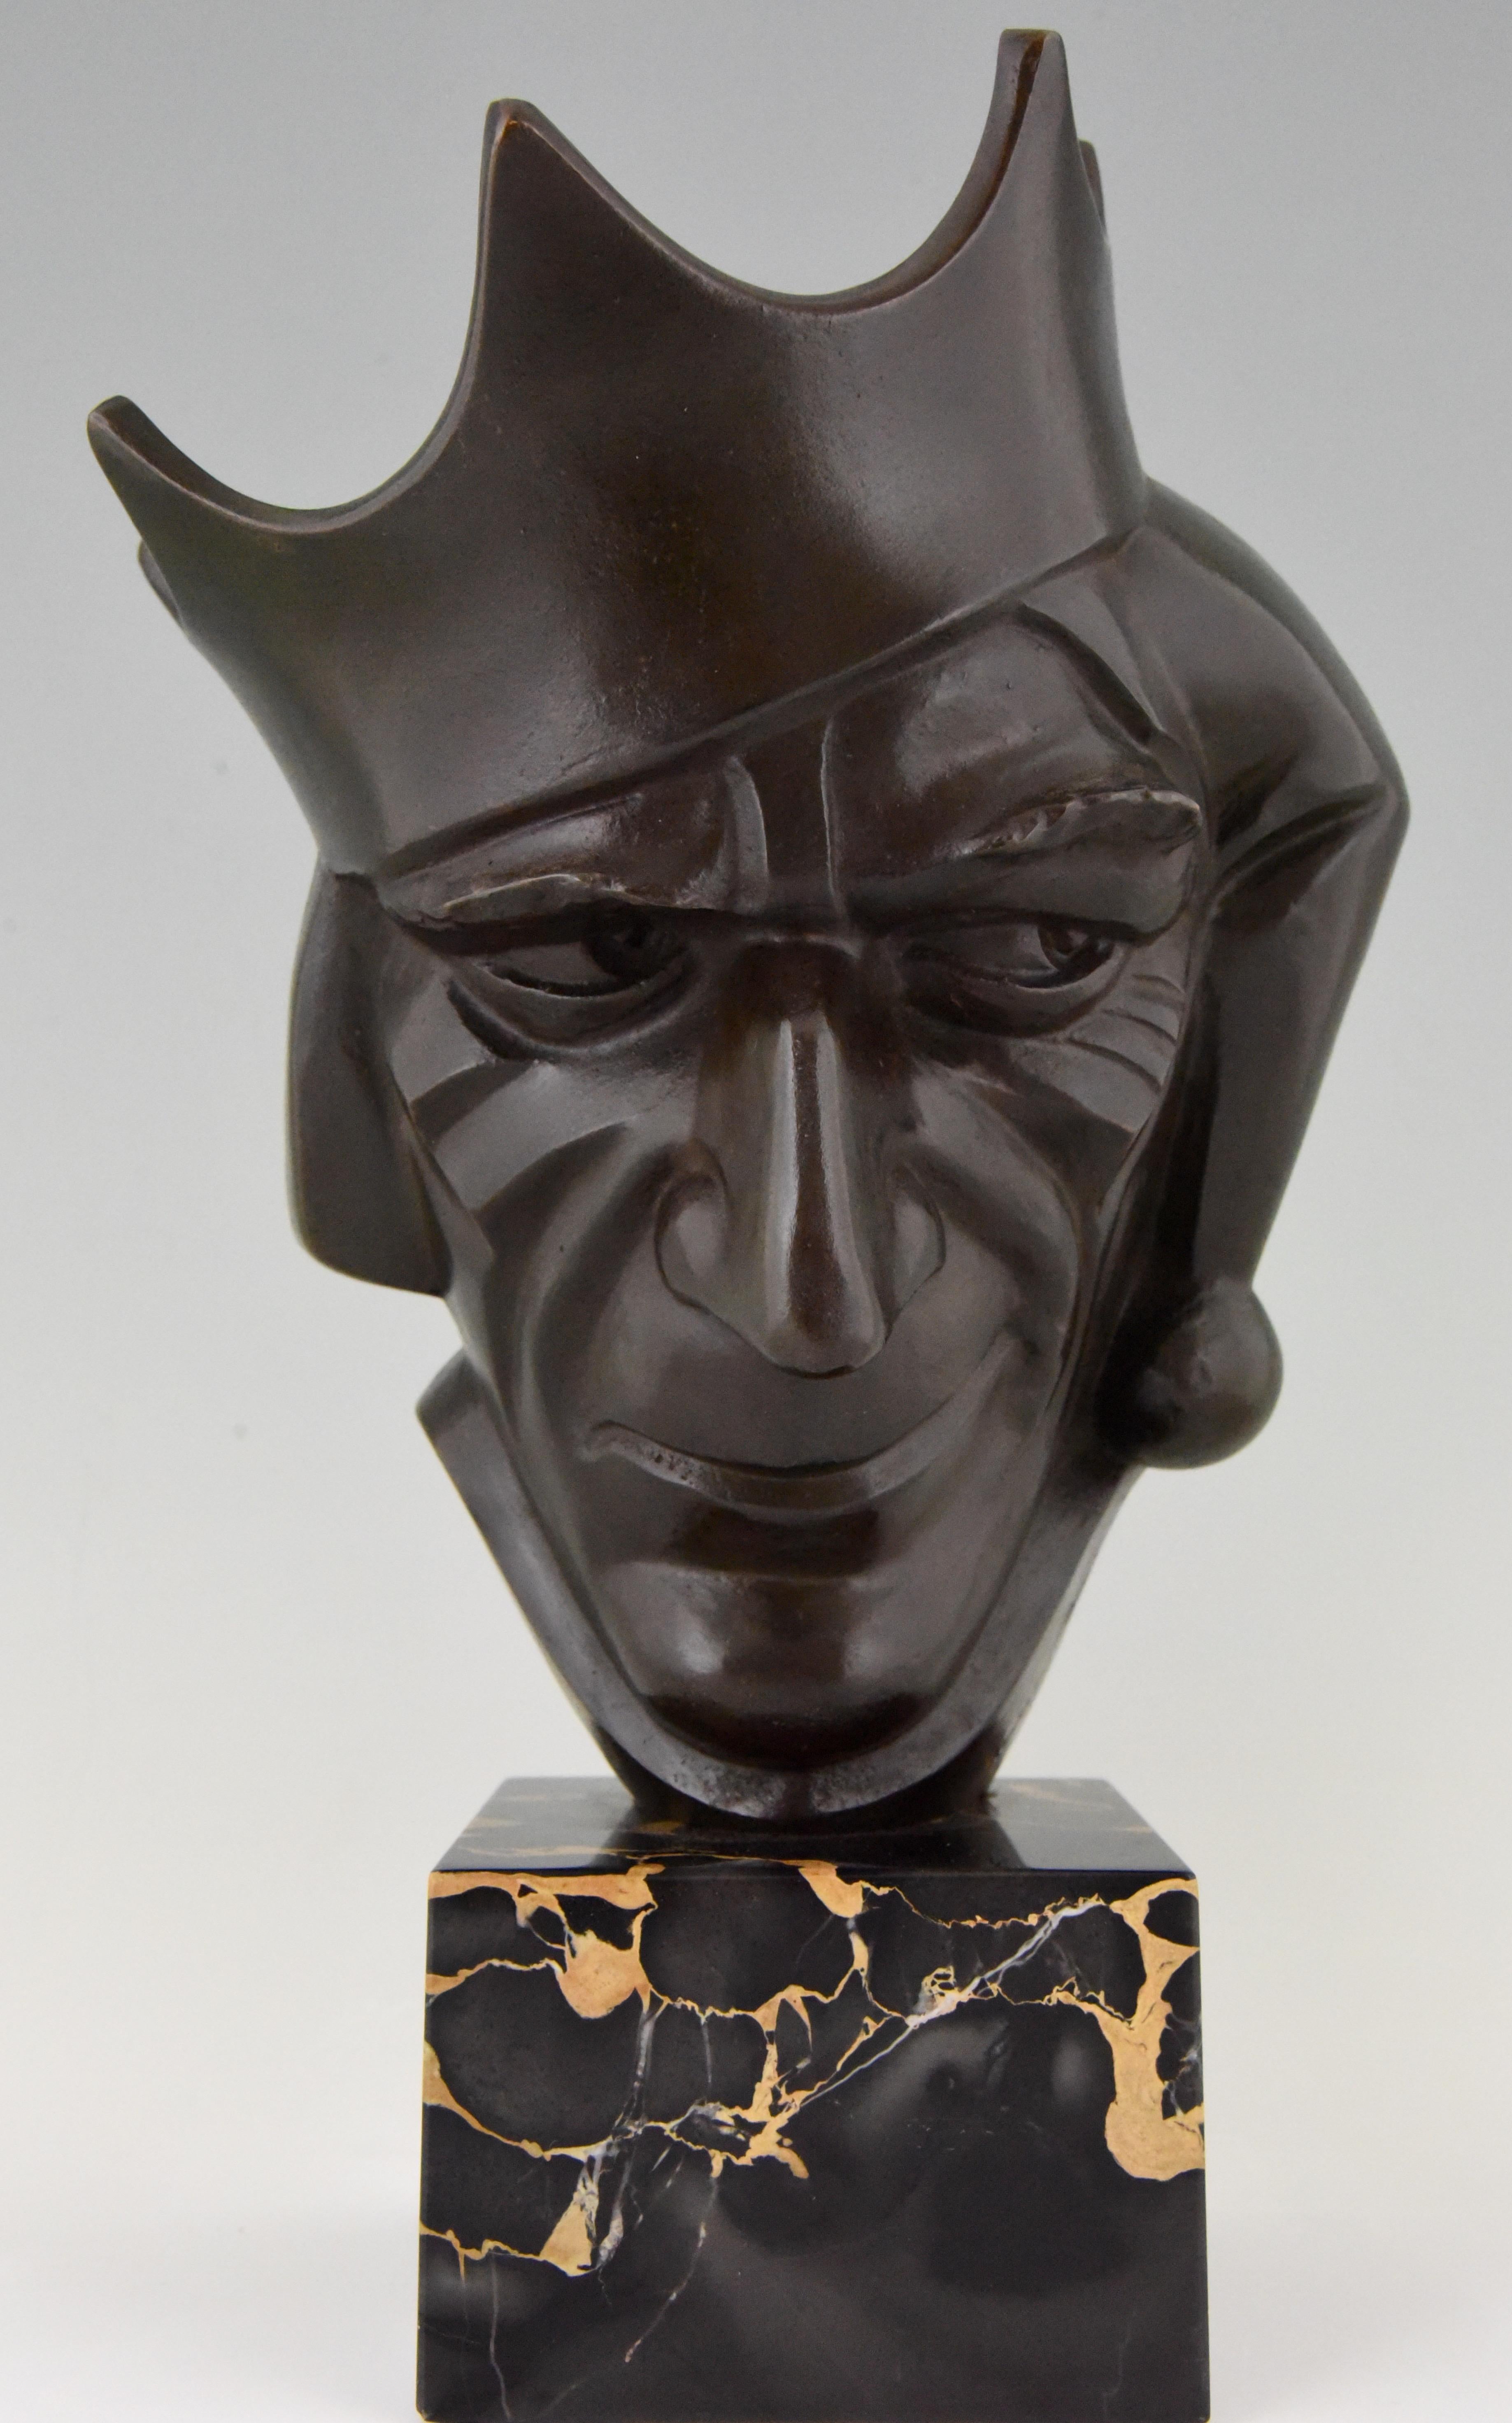 Hard to find Art Deco bronze sculpture of a court jester with crown.
Signed by Roland Paris, an Austrian artist who lived worked in Berlin.
His sculptures are very unusual showing a keen sense of satire and caricature.
The jester has beautiful